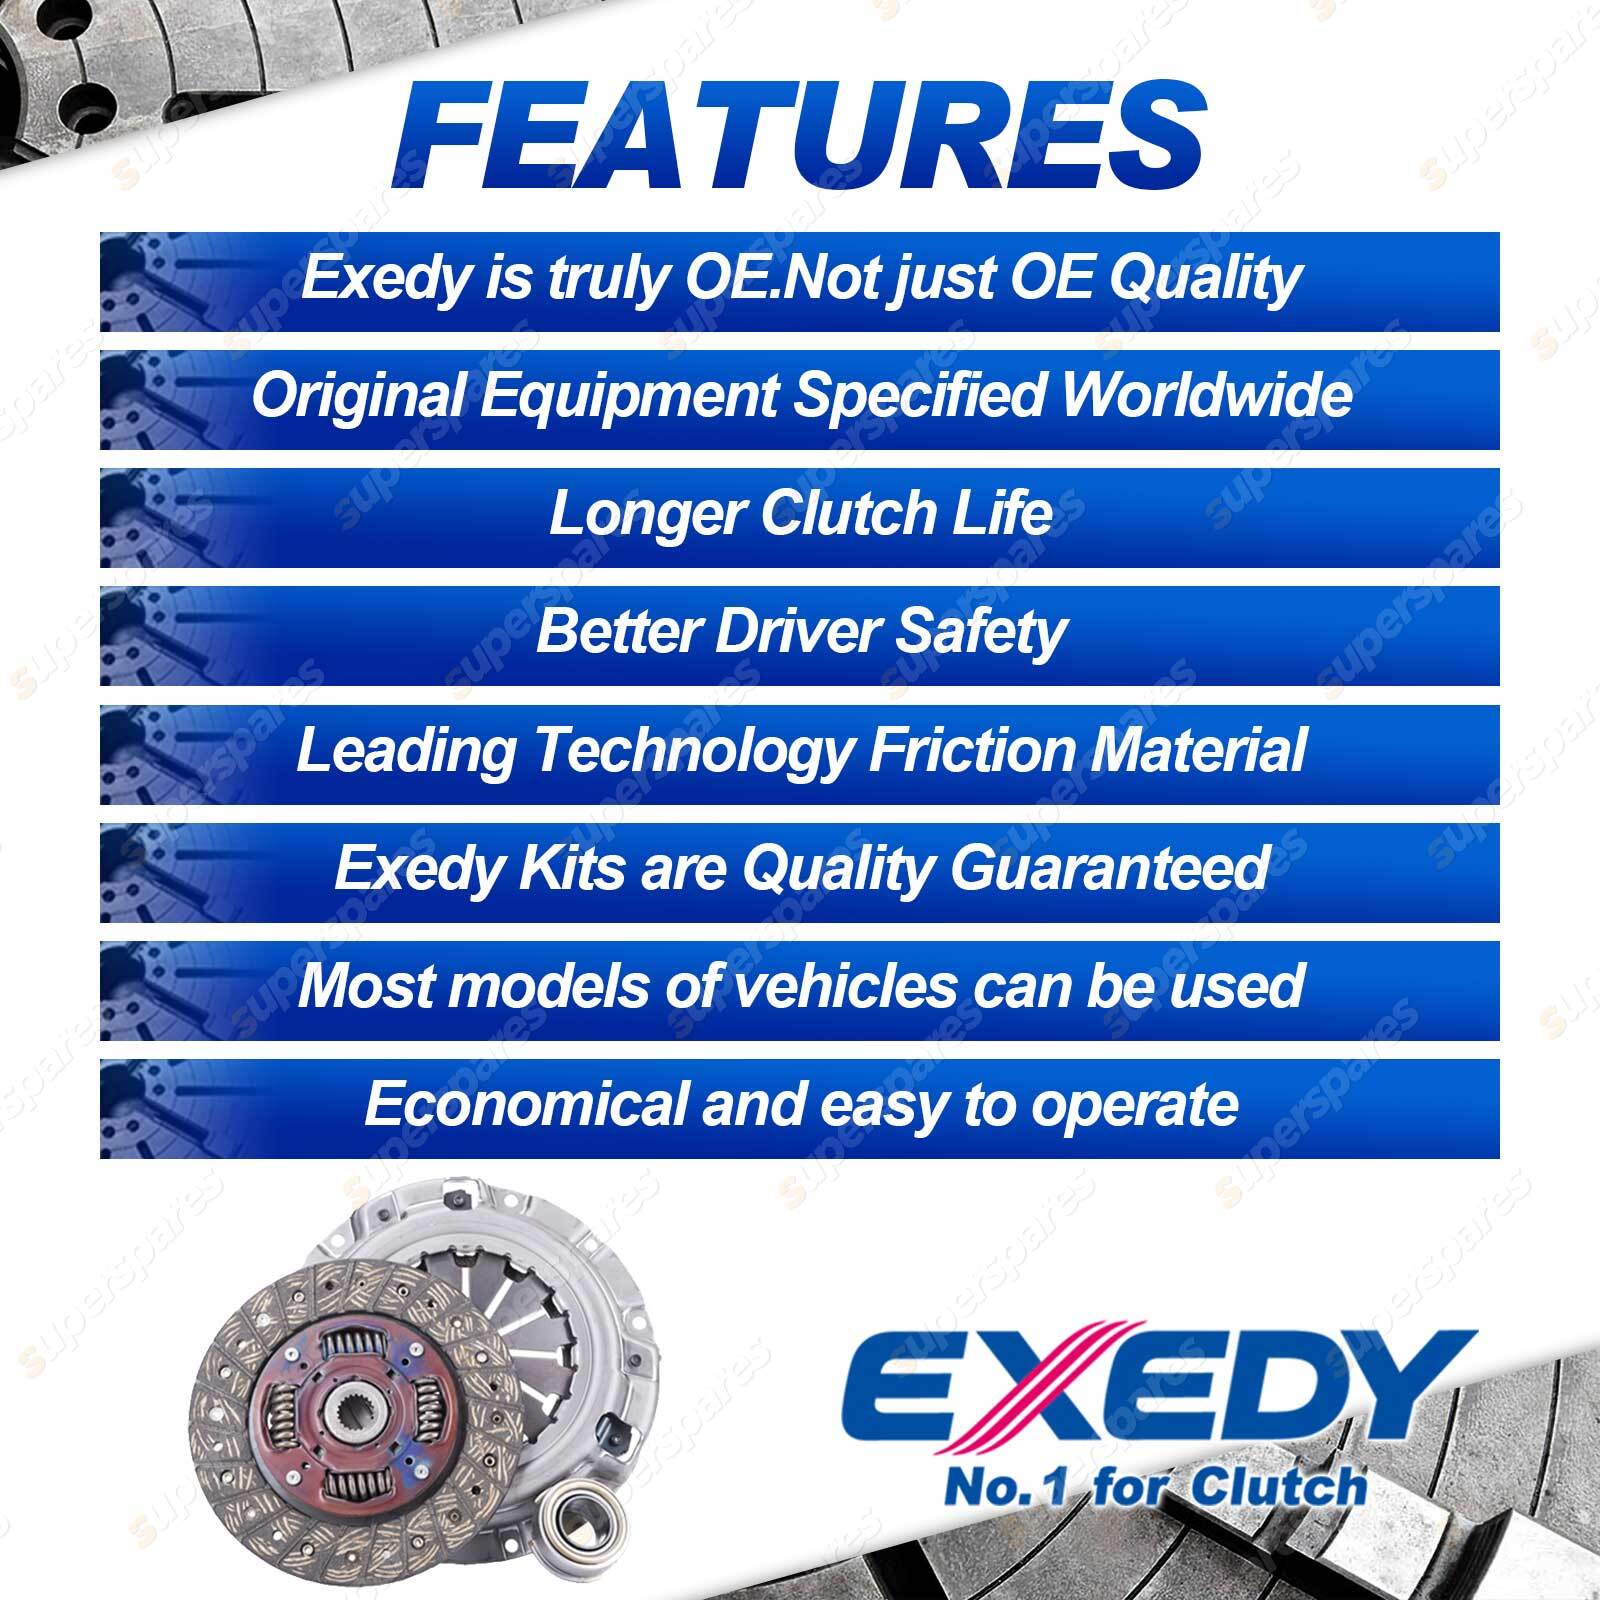 Exedy OEM Replacement DMF Clutch Kit for Jeep Wrangler JK  ENS 2007 -  2011